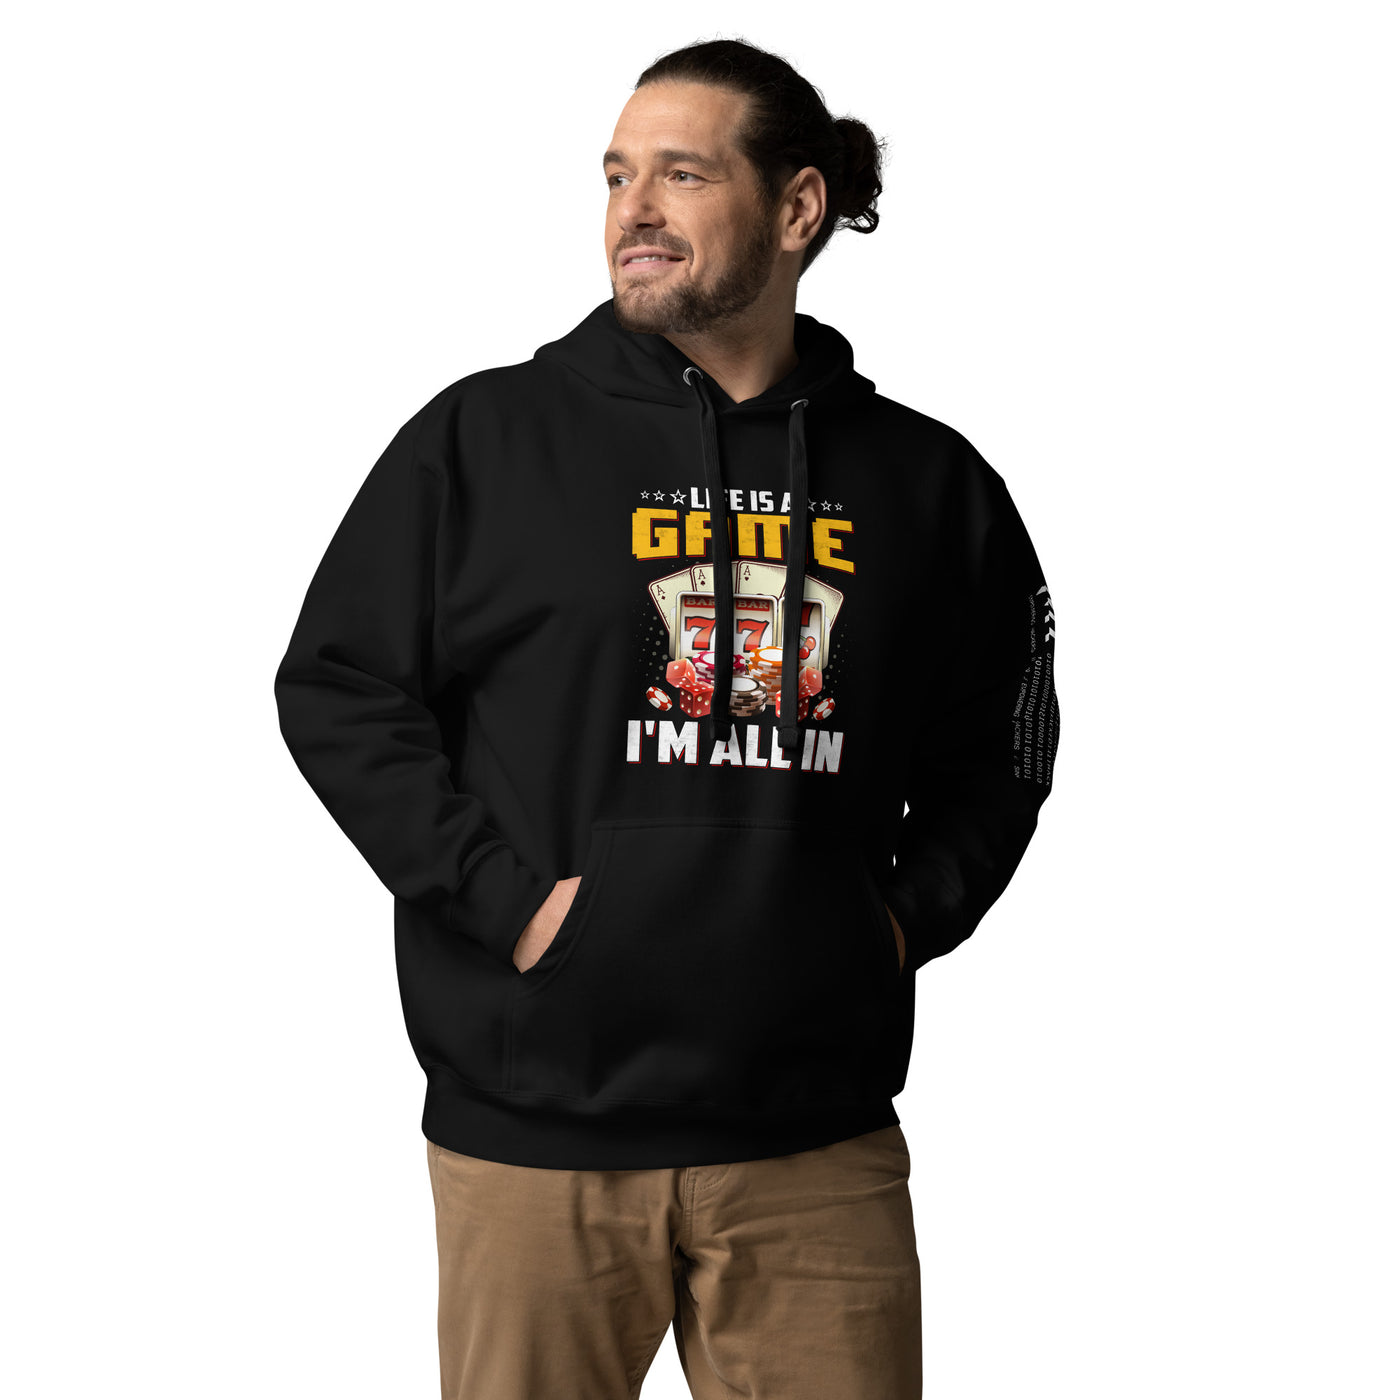 Life is a Game: I'm all in - Unisex Hoodie